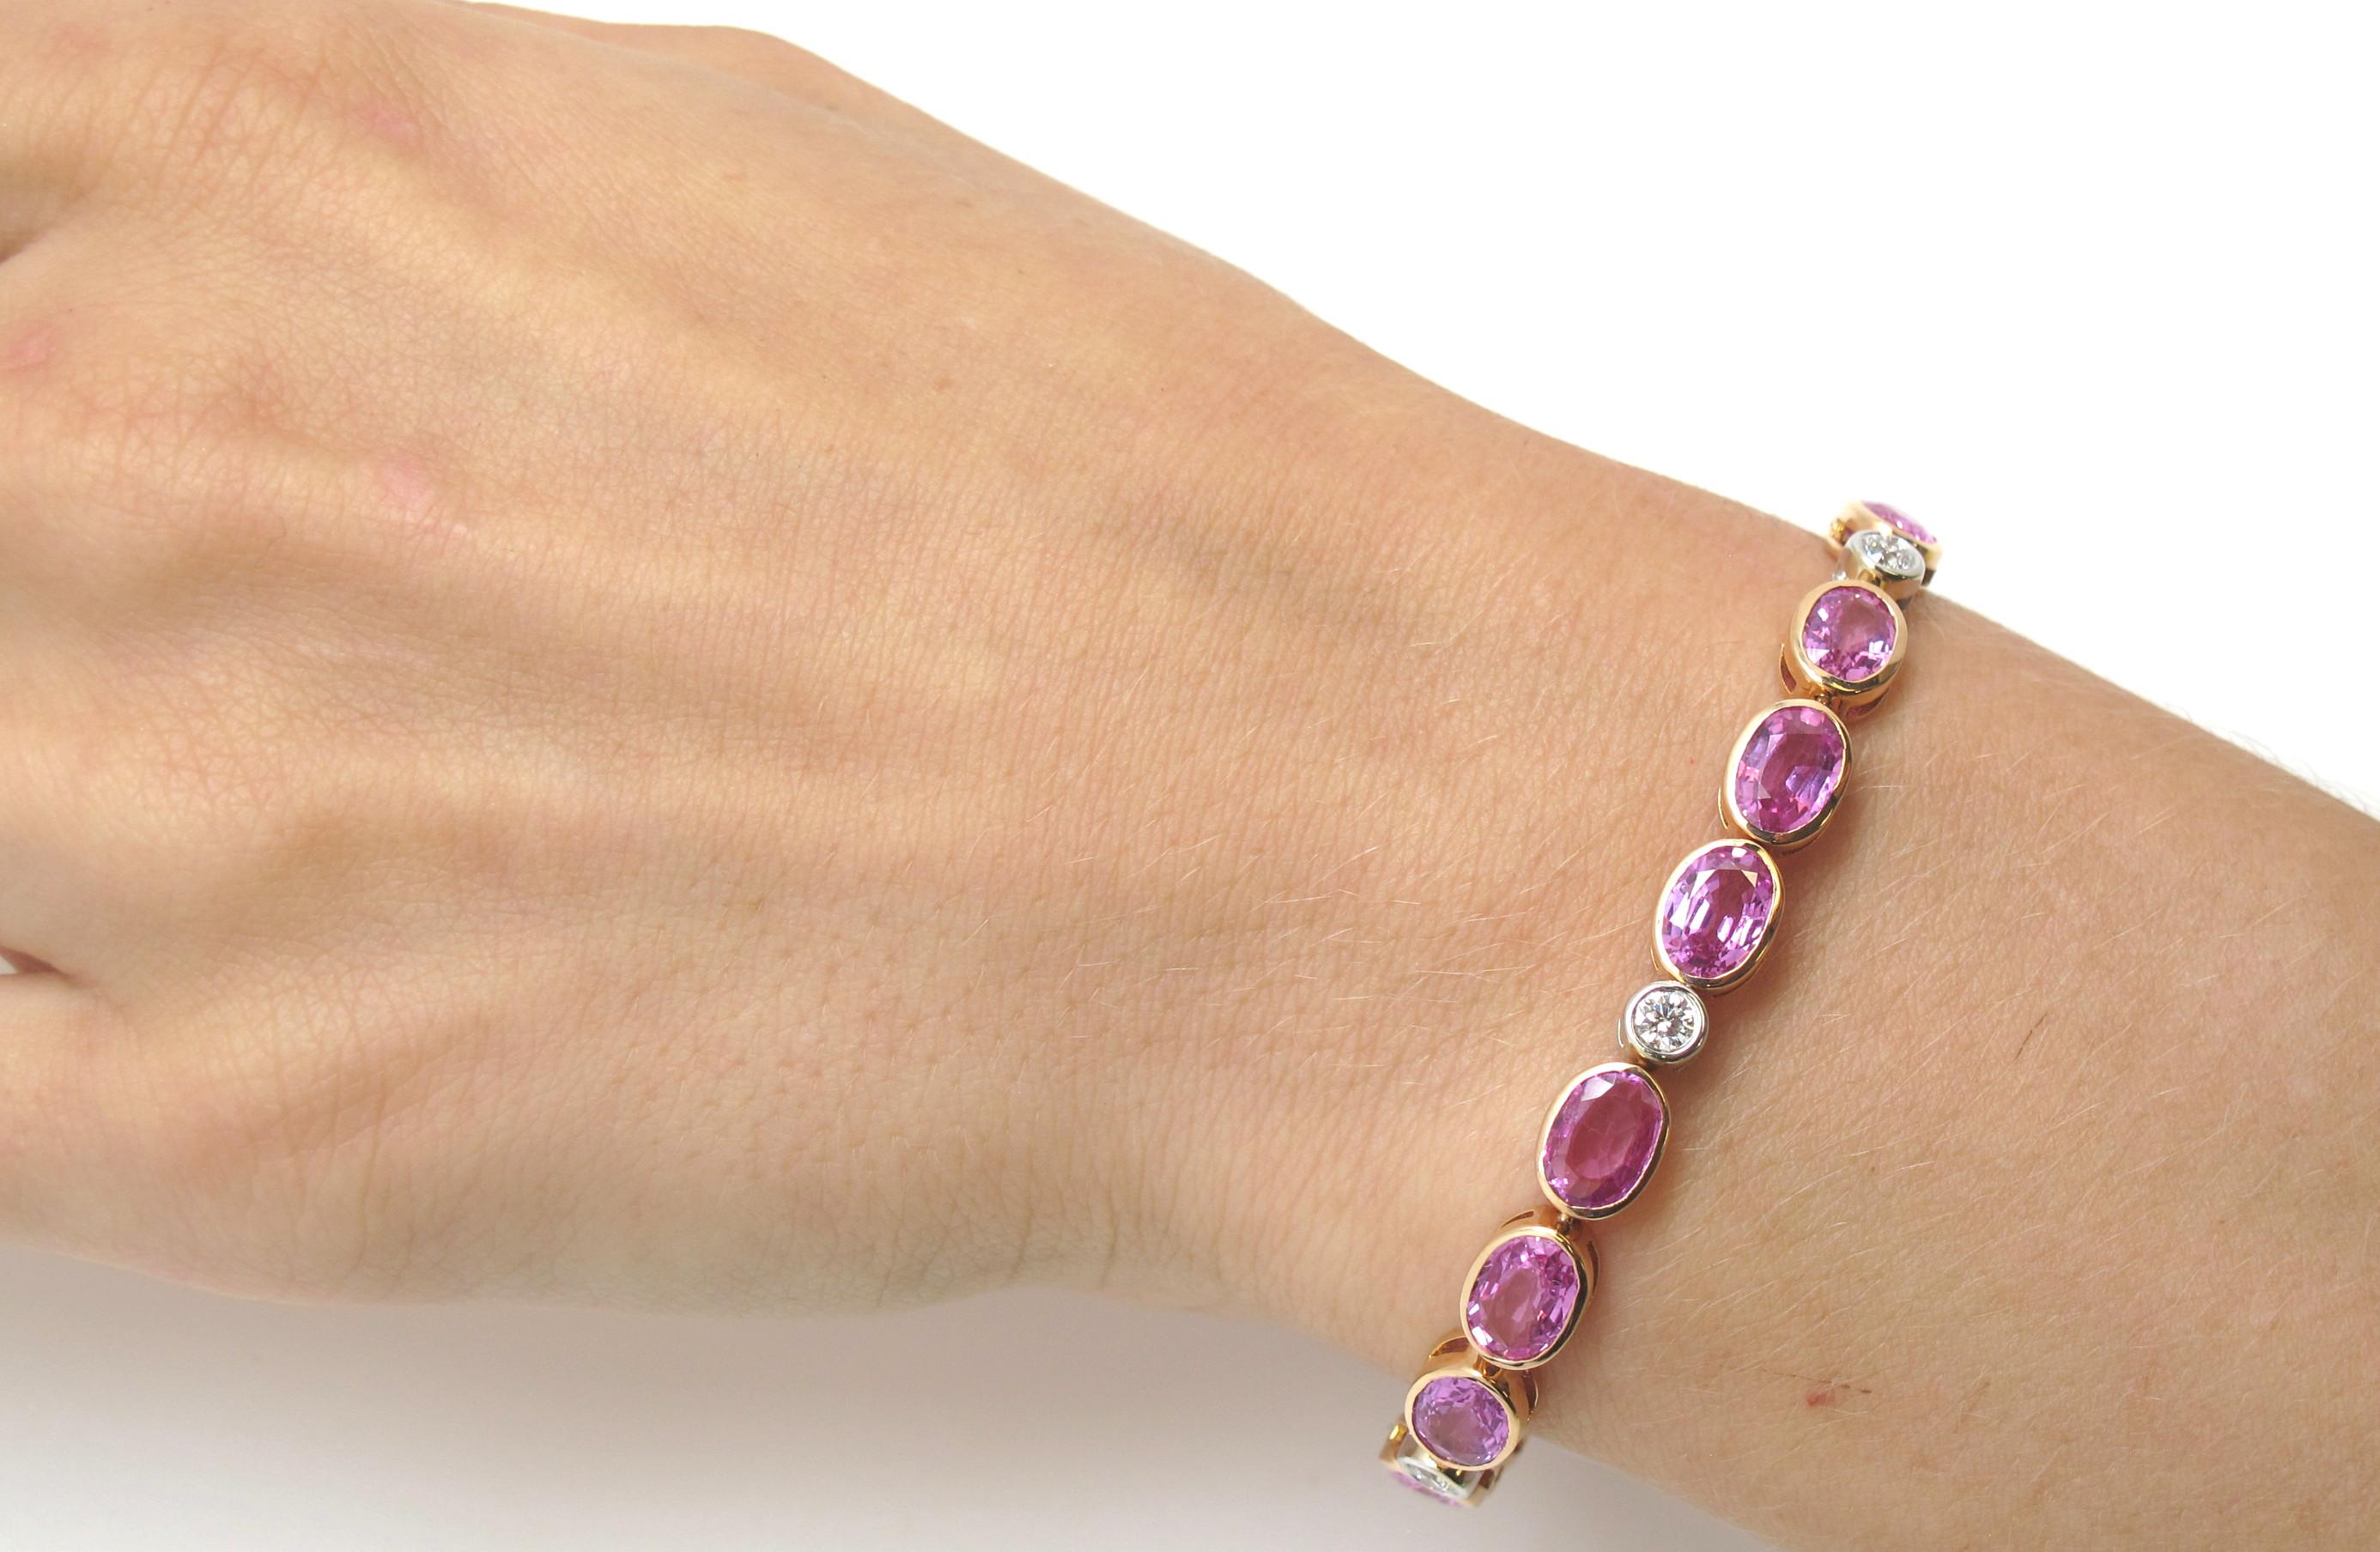 Oval Cut Pink Sapphire and Diamond Tennis Bracelet, Rose, White Gold, 19.17 Carat Total